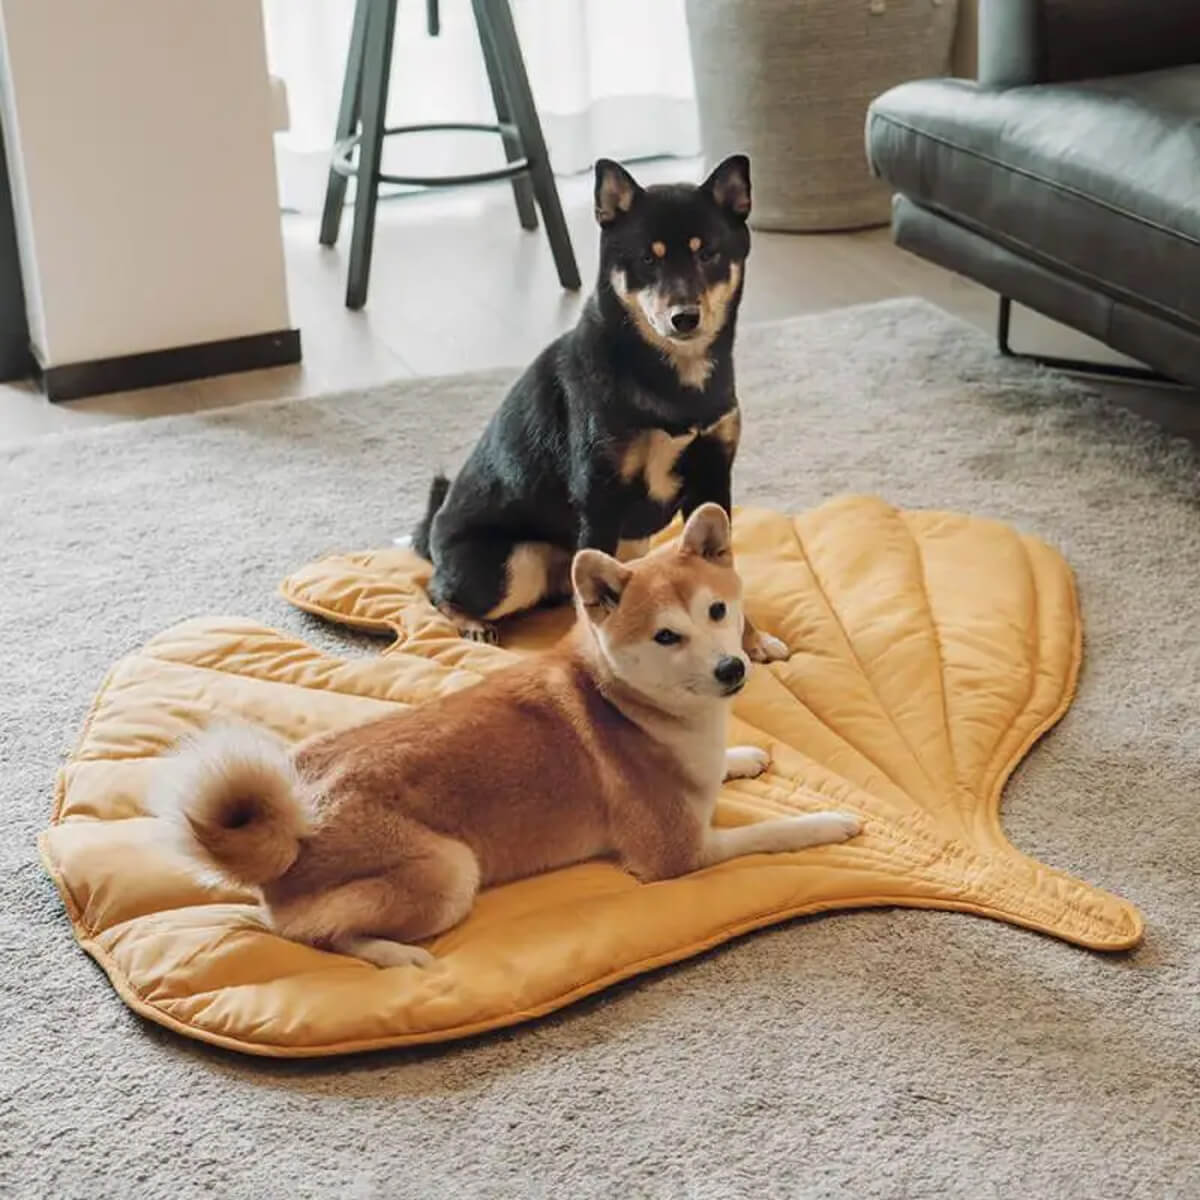 Stellar-Skeleton-Chill-Out-Leaf-Pet-Cooling-Mat-Cooling-Mat-for-Dogs-Cats-Bunnies-Rabbits-Pet-Cooling-Blanket-08